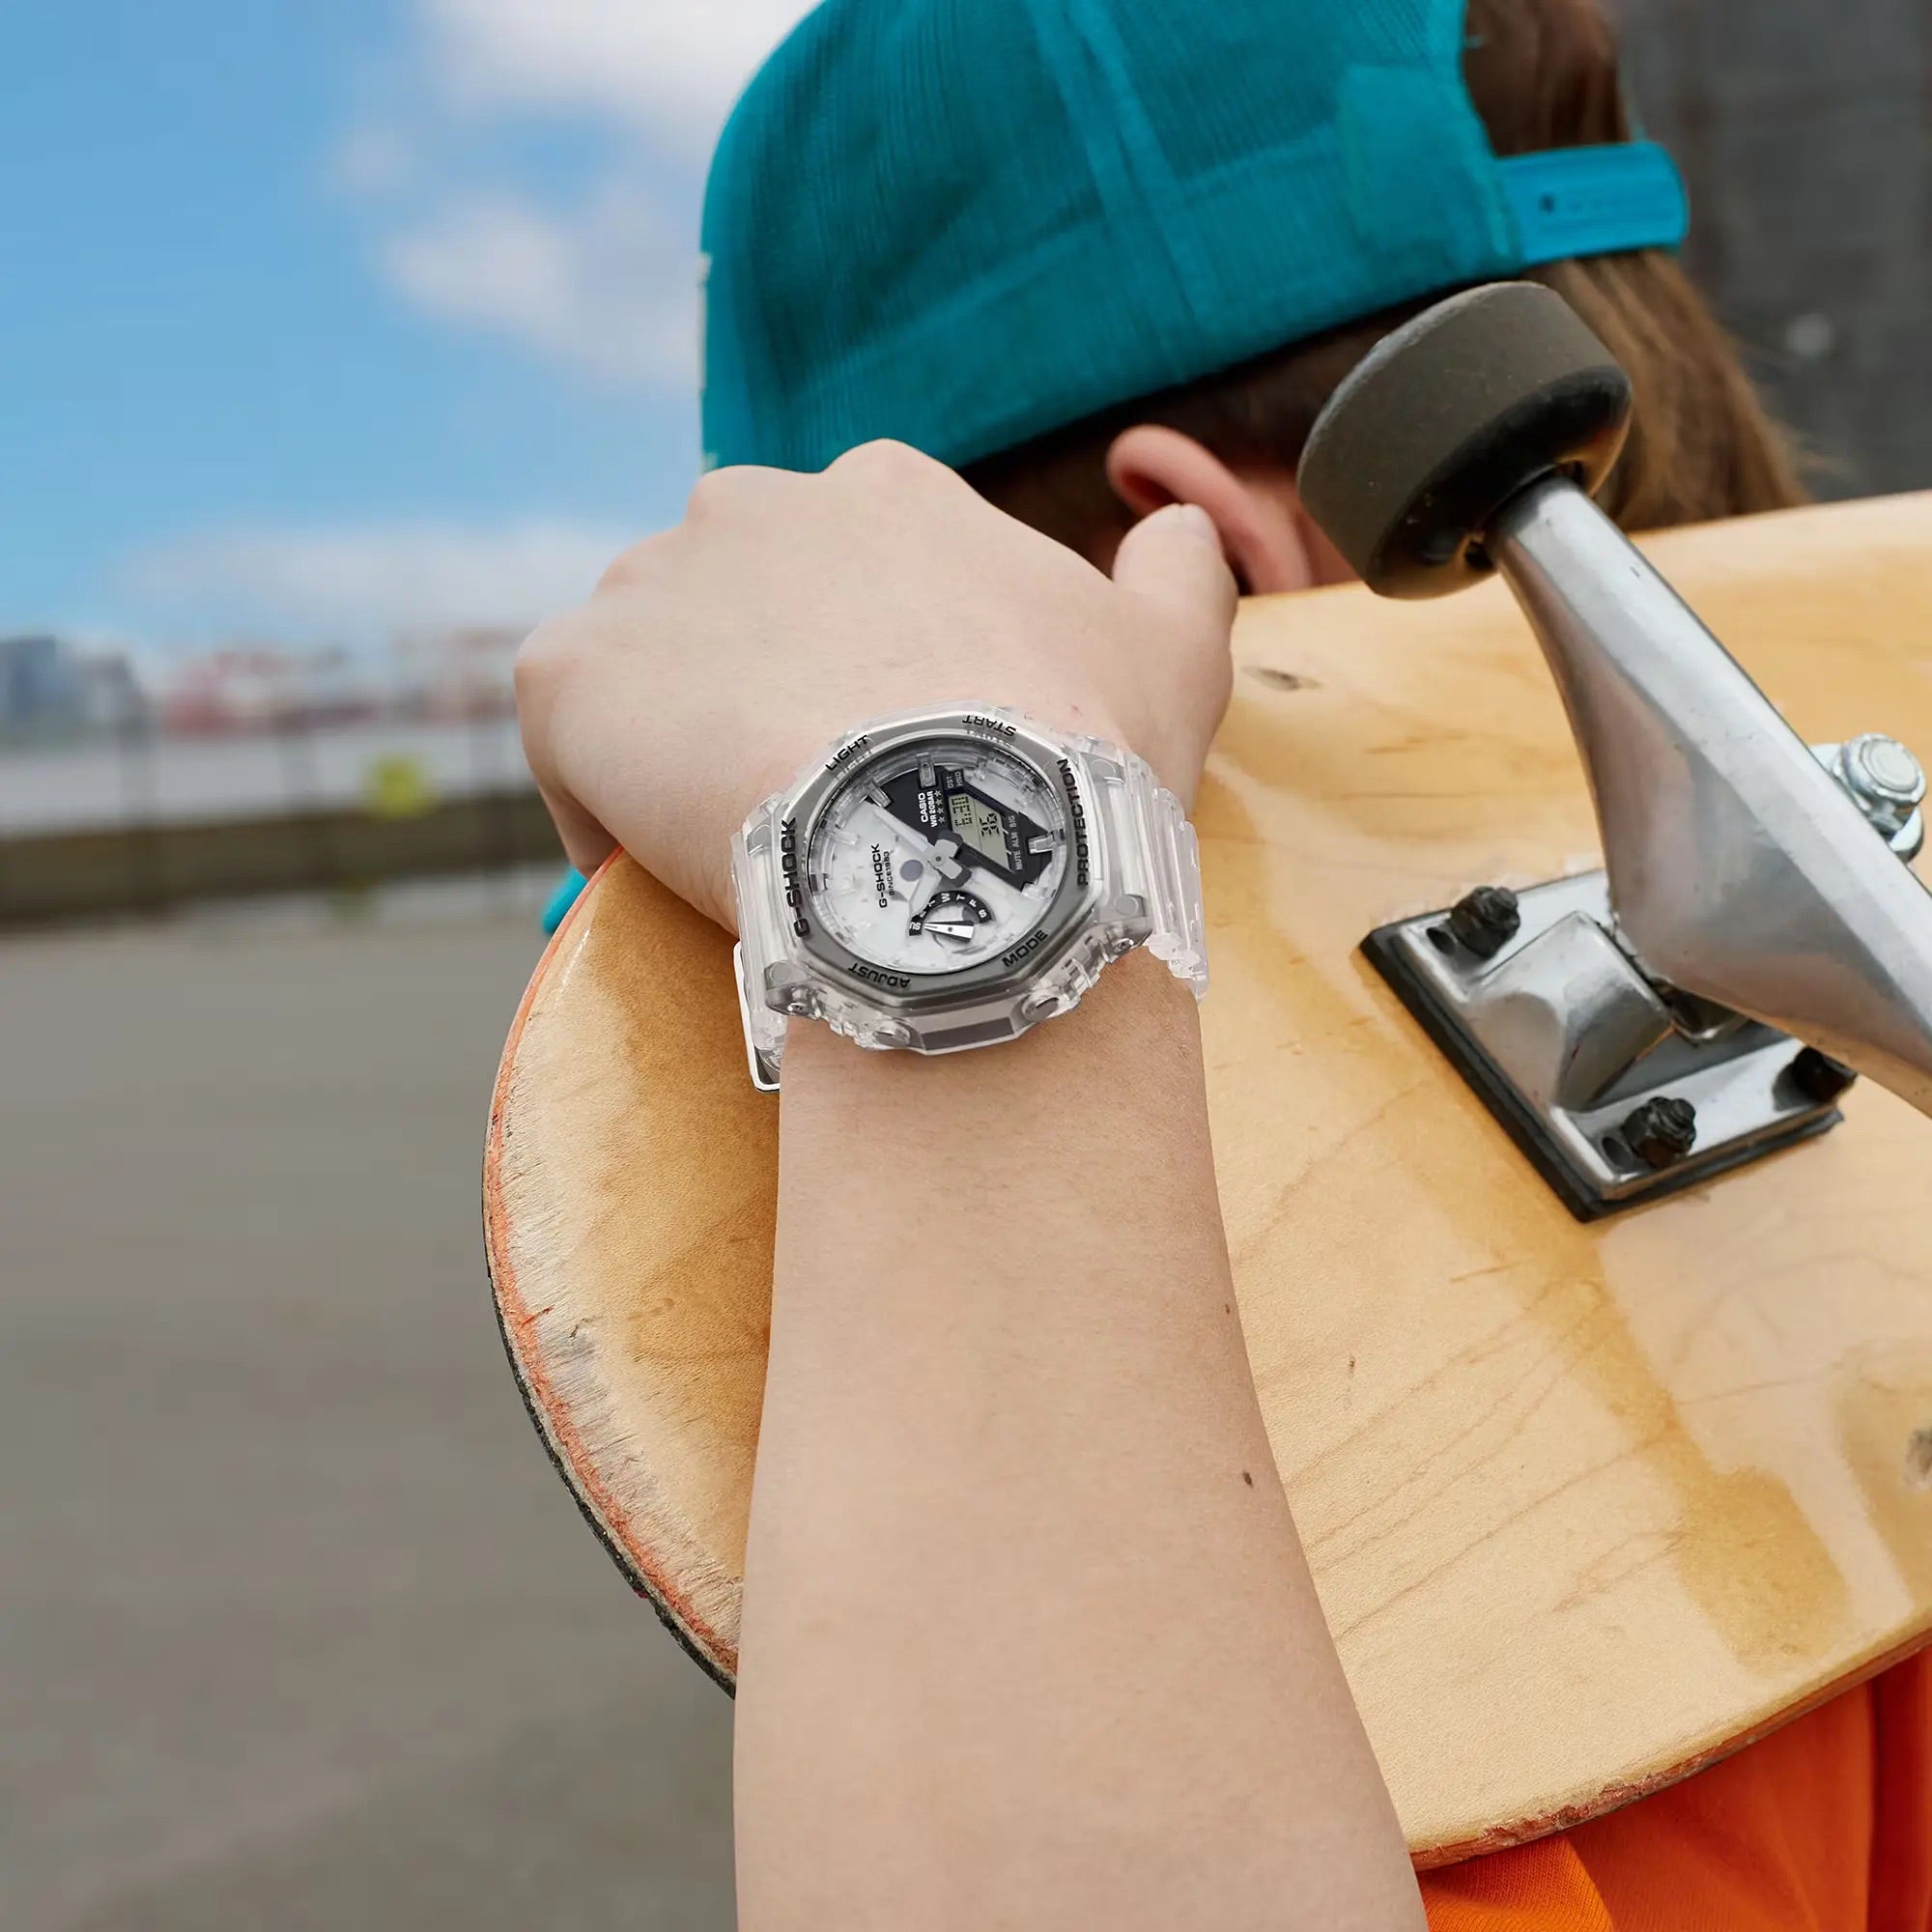 Skateboarder sporting the G-SHOCK GA2140RX-7A watch, featuring a transparent design, during an urban skateboarding session.